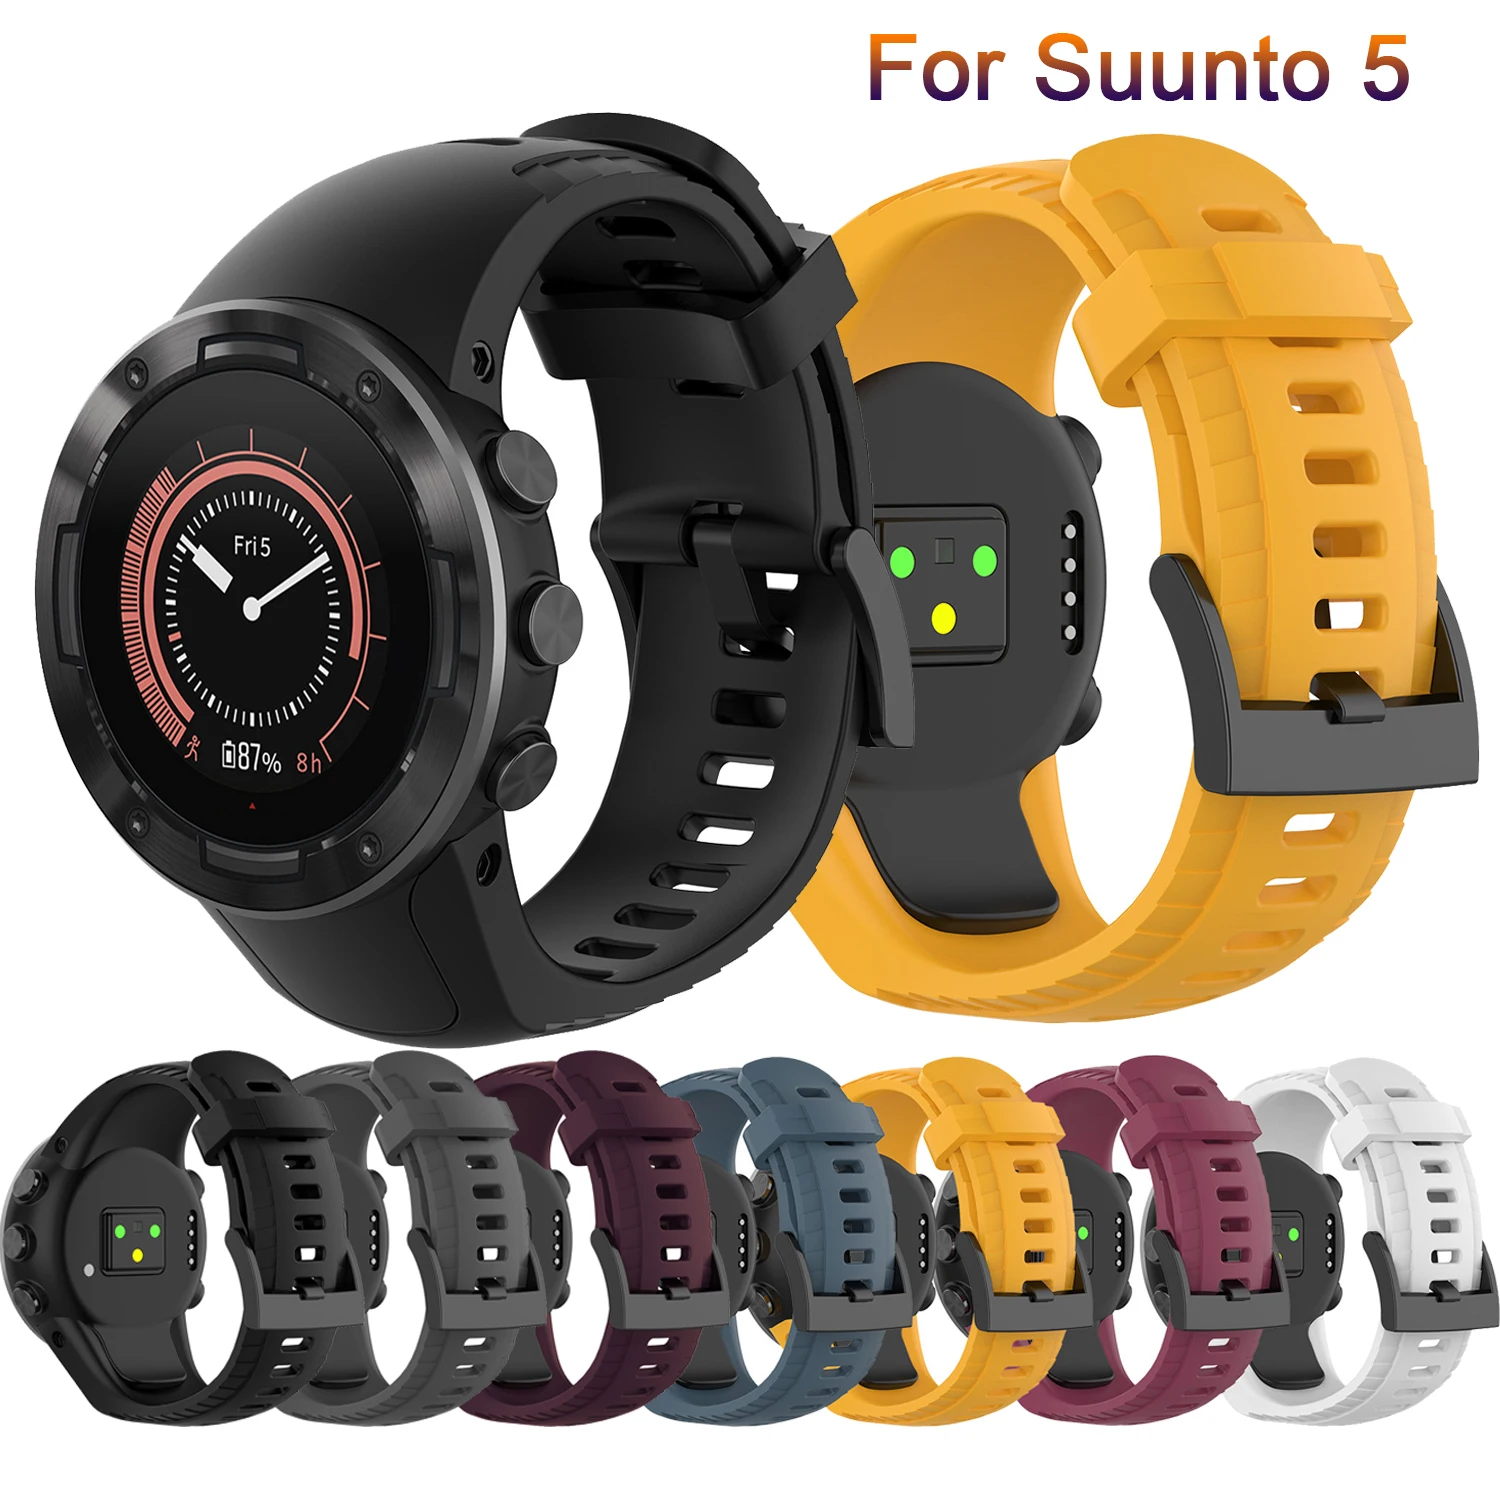 For Suunto 5 Smartwatch Wristband outdoors Sports Accessories Silicone Replacement WatchBand Wrist Strap Bracelet belt charger